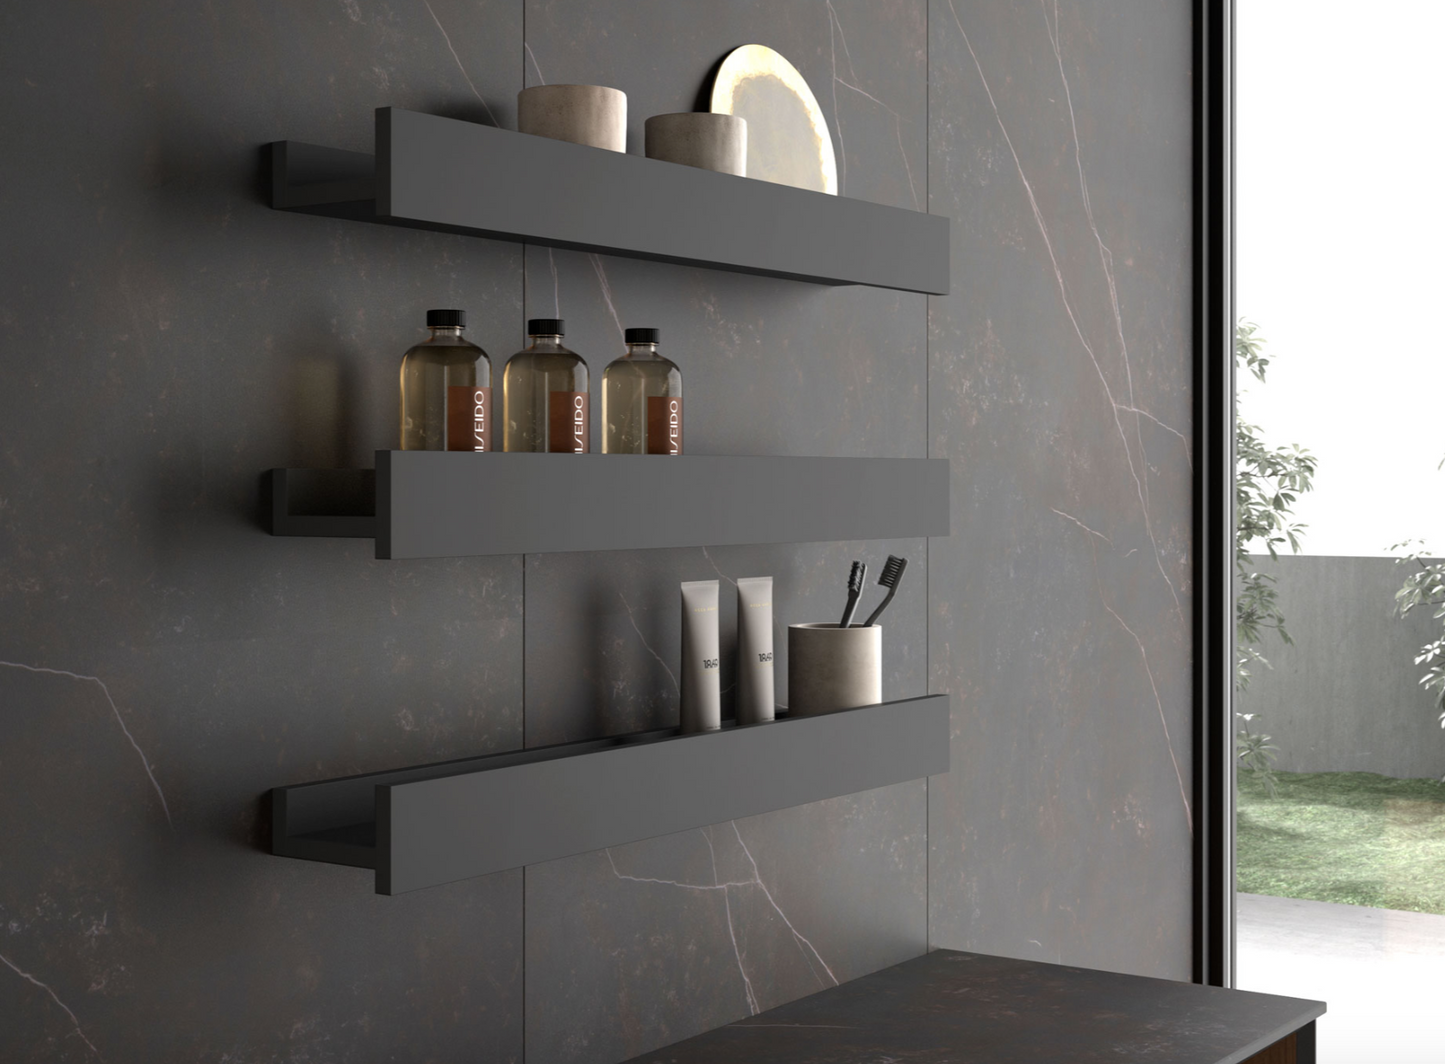 Kimono lacquered wall shelf by Maderó Atelier